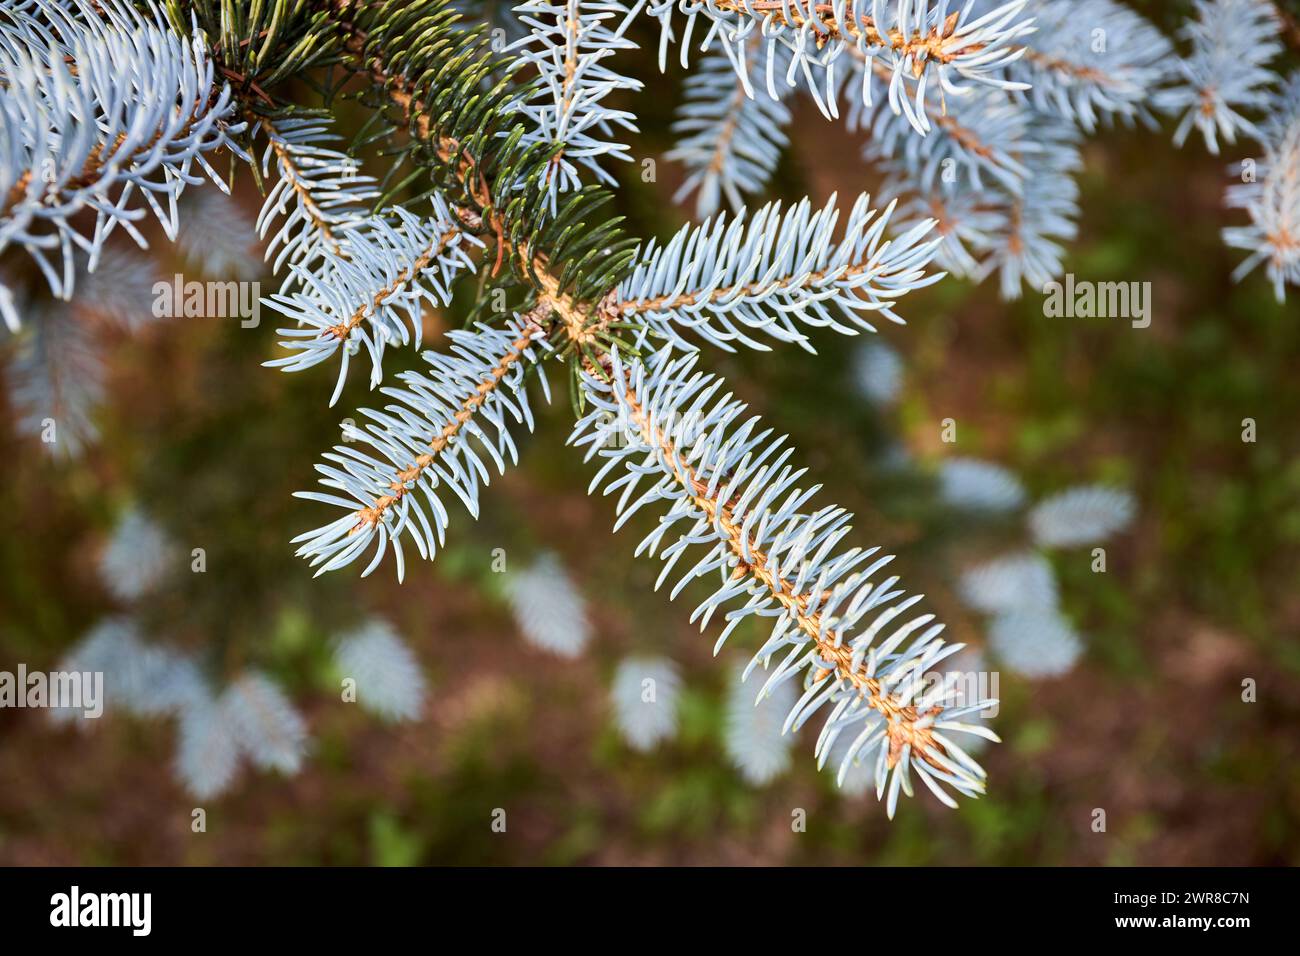 Blue spruce Picea pungens or green spruce Colorado spruce or Colorado blue spruce coniferous evergreen tree branches. Natural floral background of Stock Photo